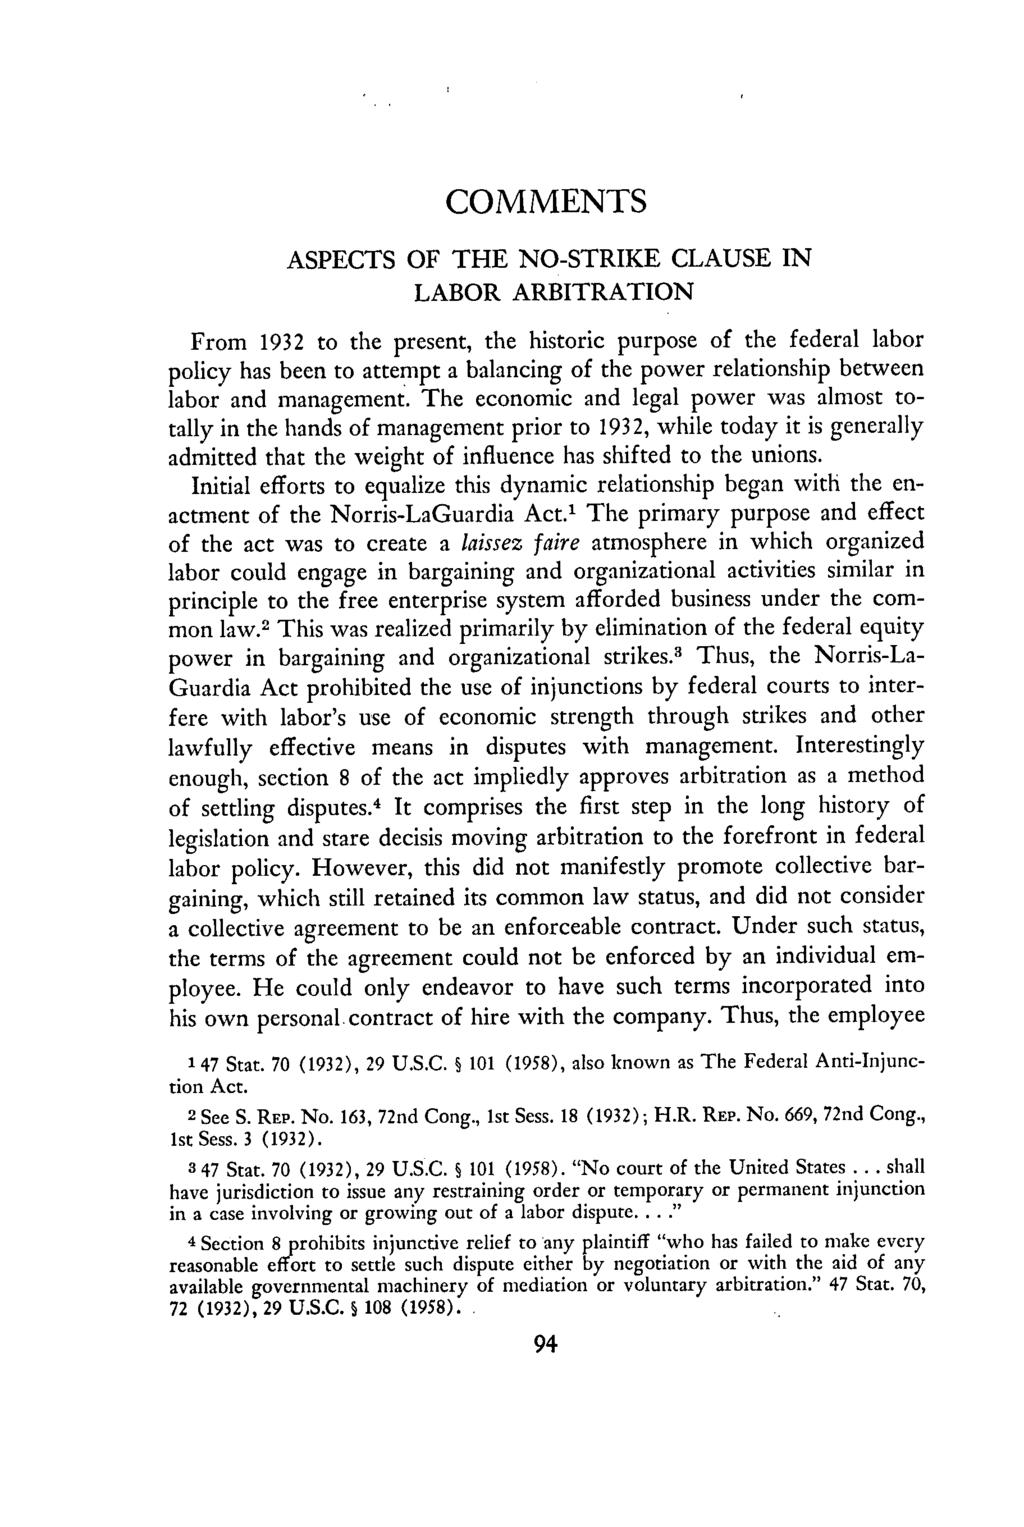 ASPECTS OF THE NO-STRIKE CLAUSE IN LABOR ARBITRATION From 1932 to the present, the historic purpose of the federal labor policy has been to attempt a balancing of the power relationship between labor